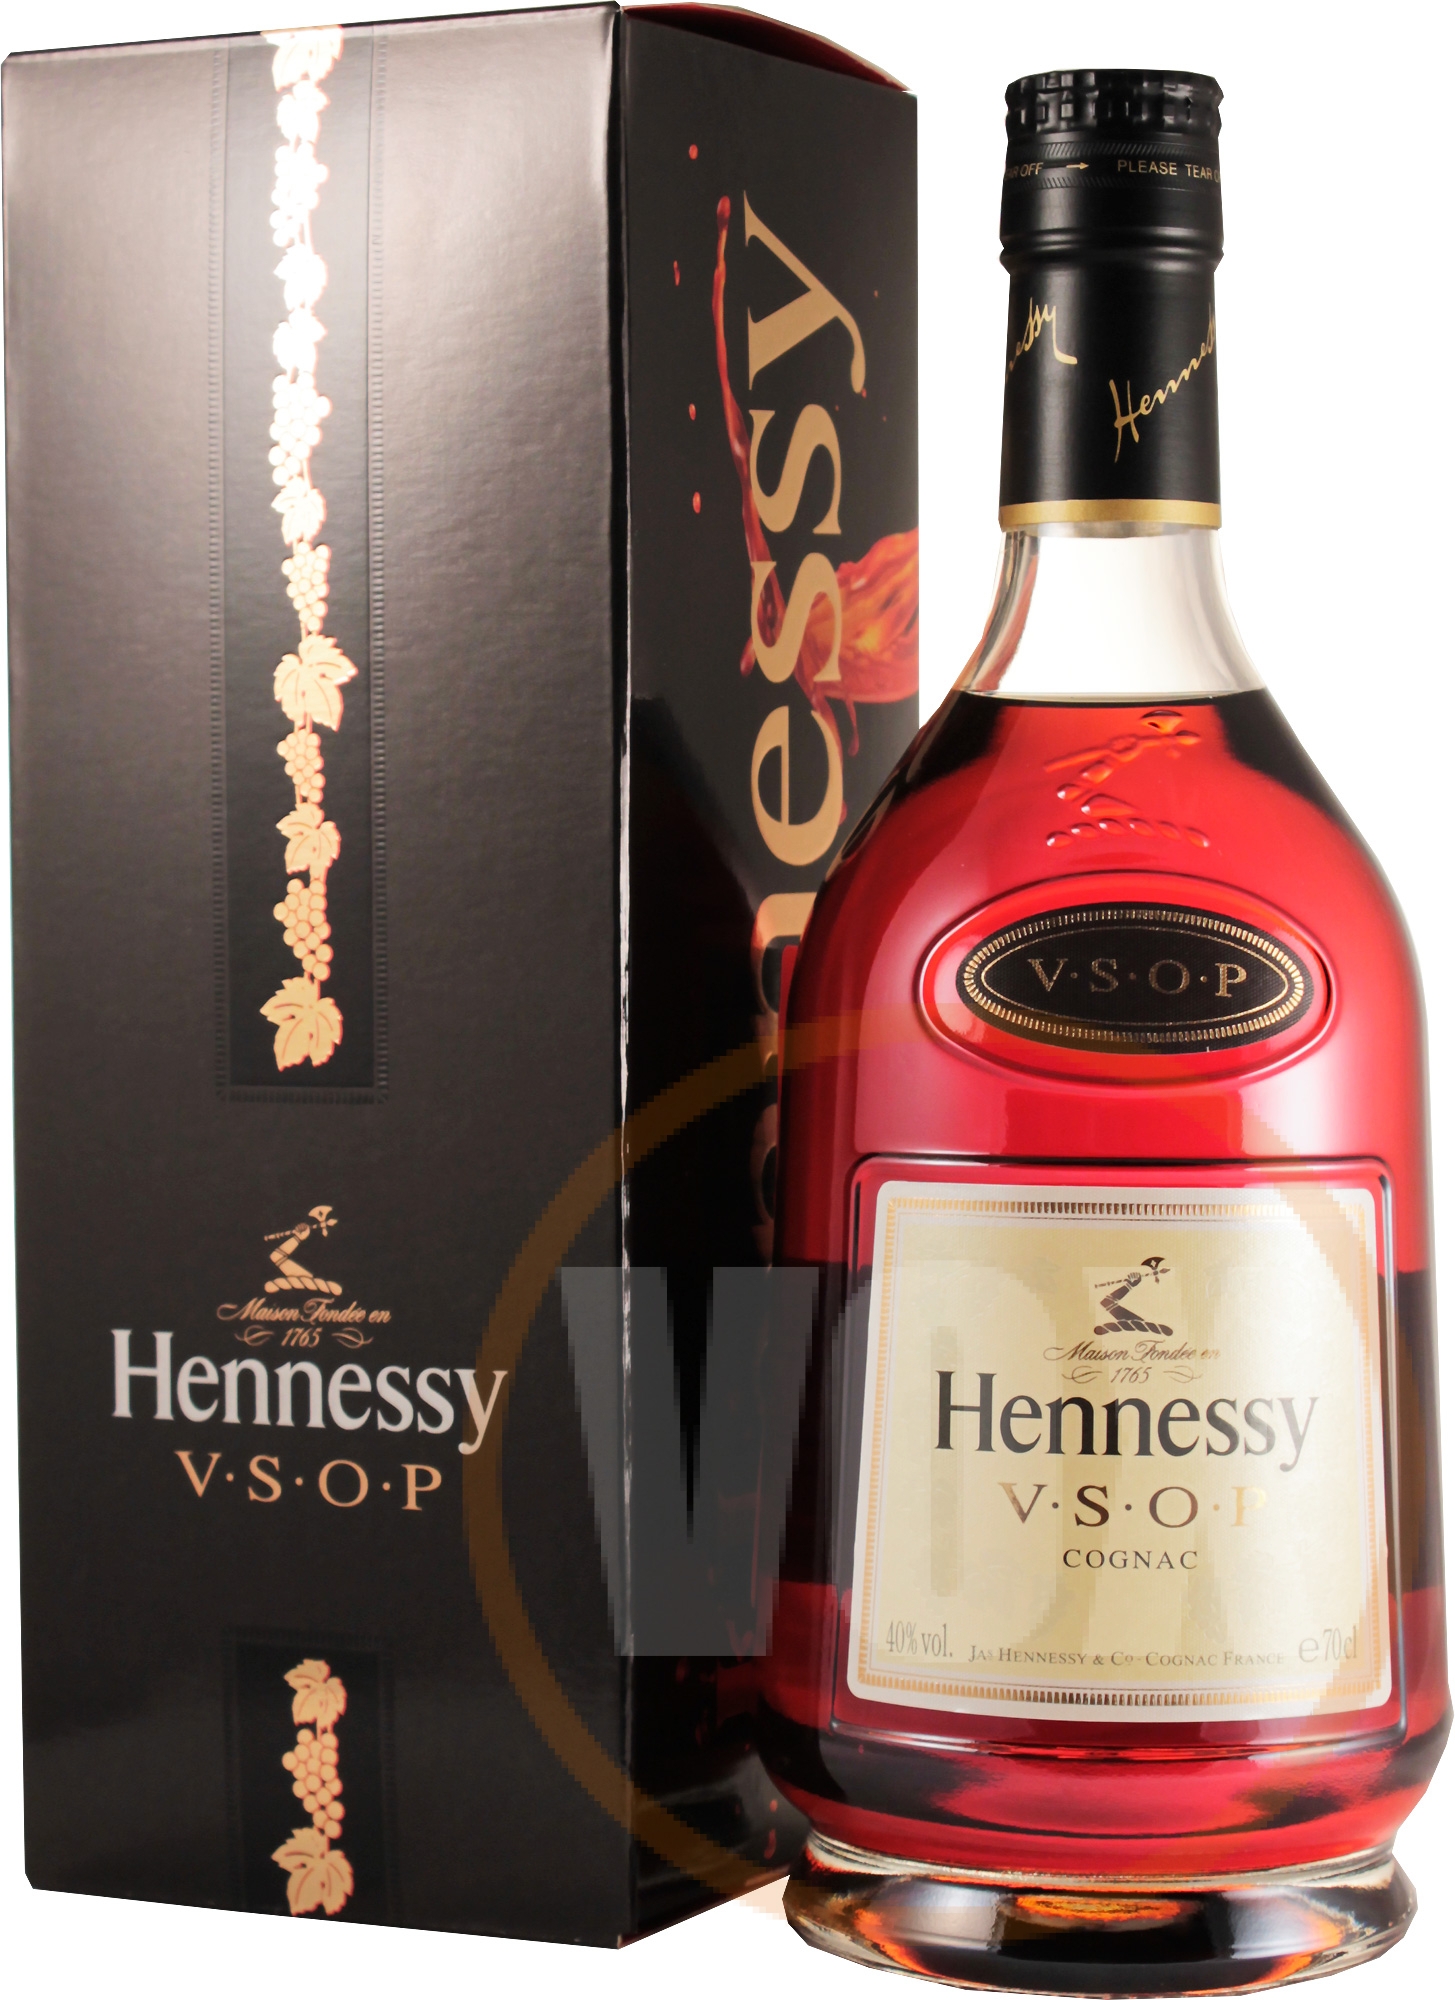 For The 200th Anniversary Of Hennessy V S O P Privilège A